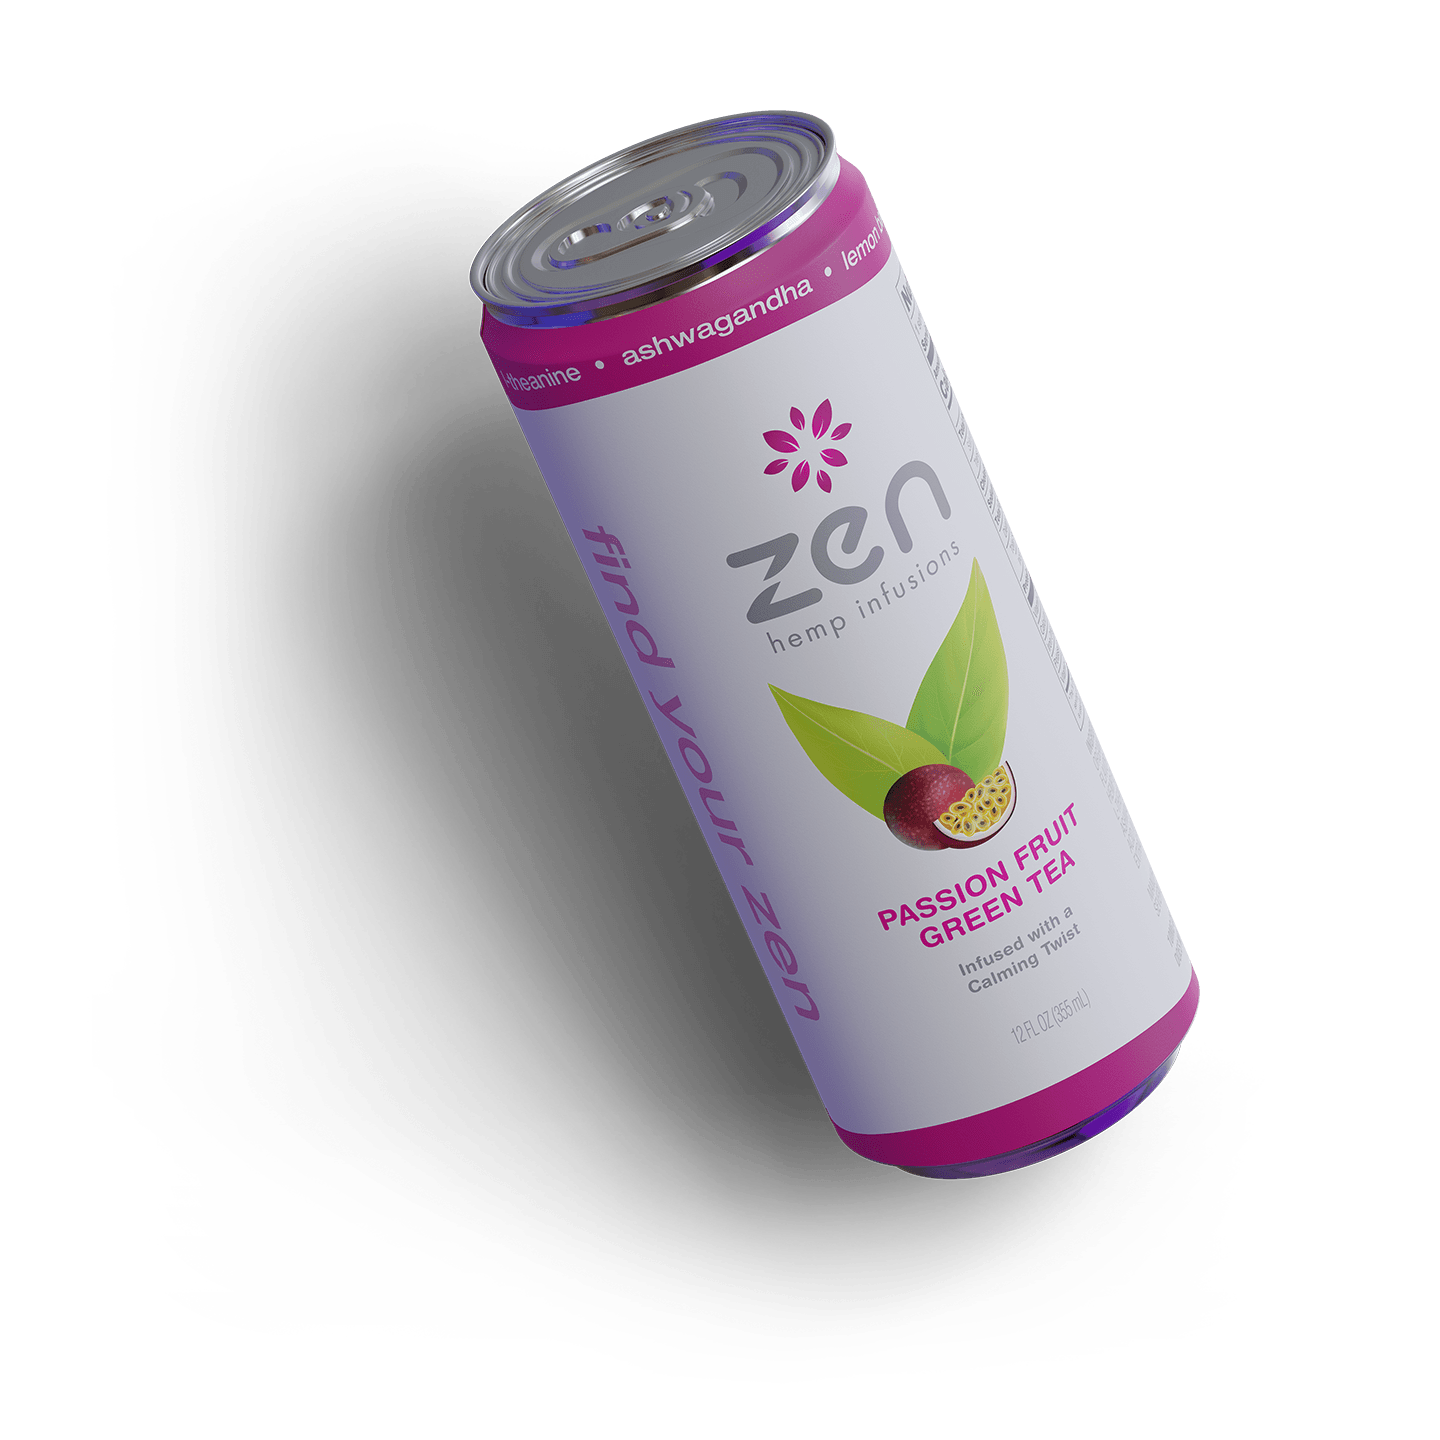 Angled Passion Fruit Green Tea 01 1440p Compressed